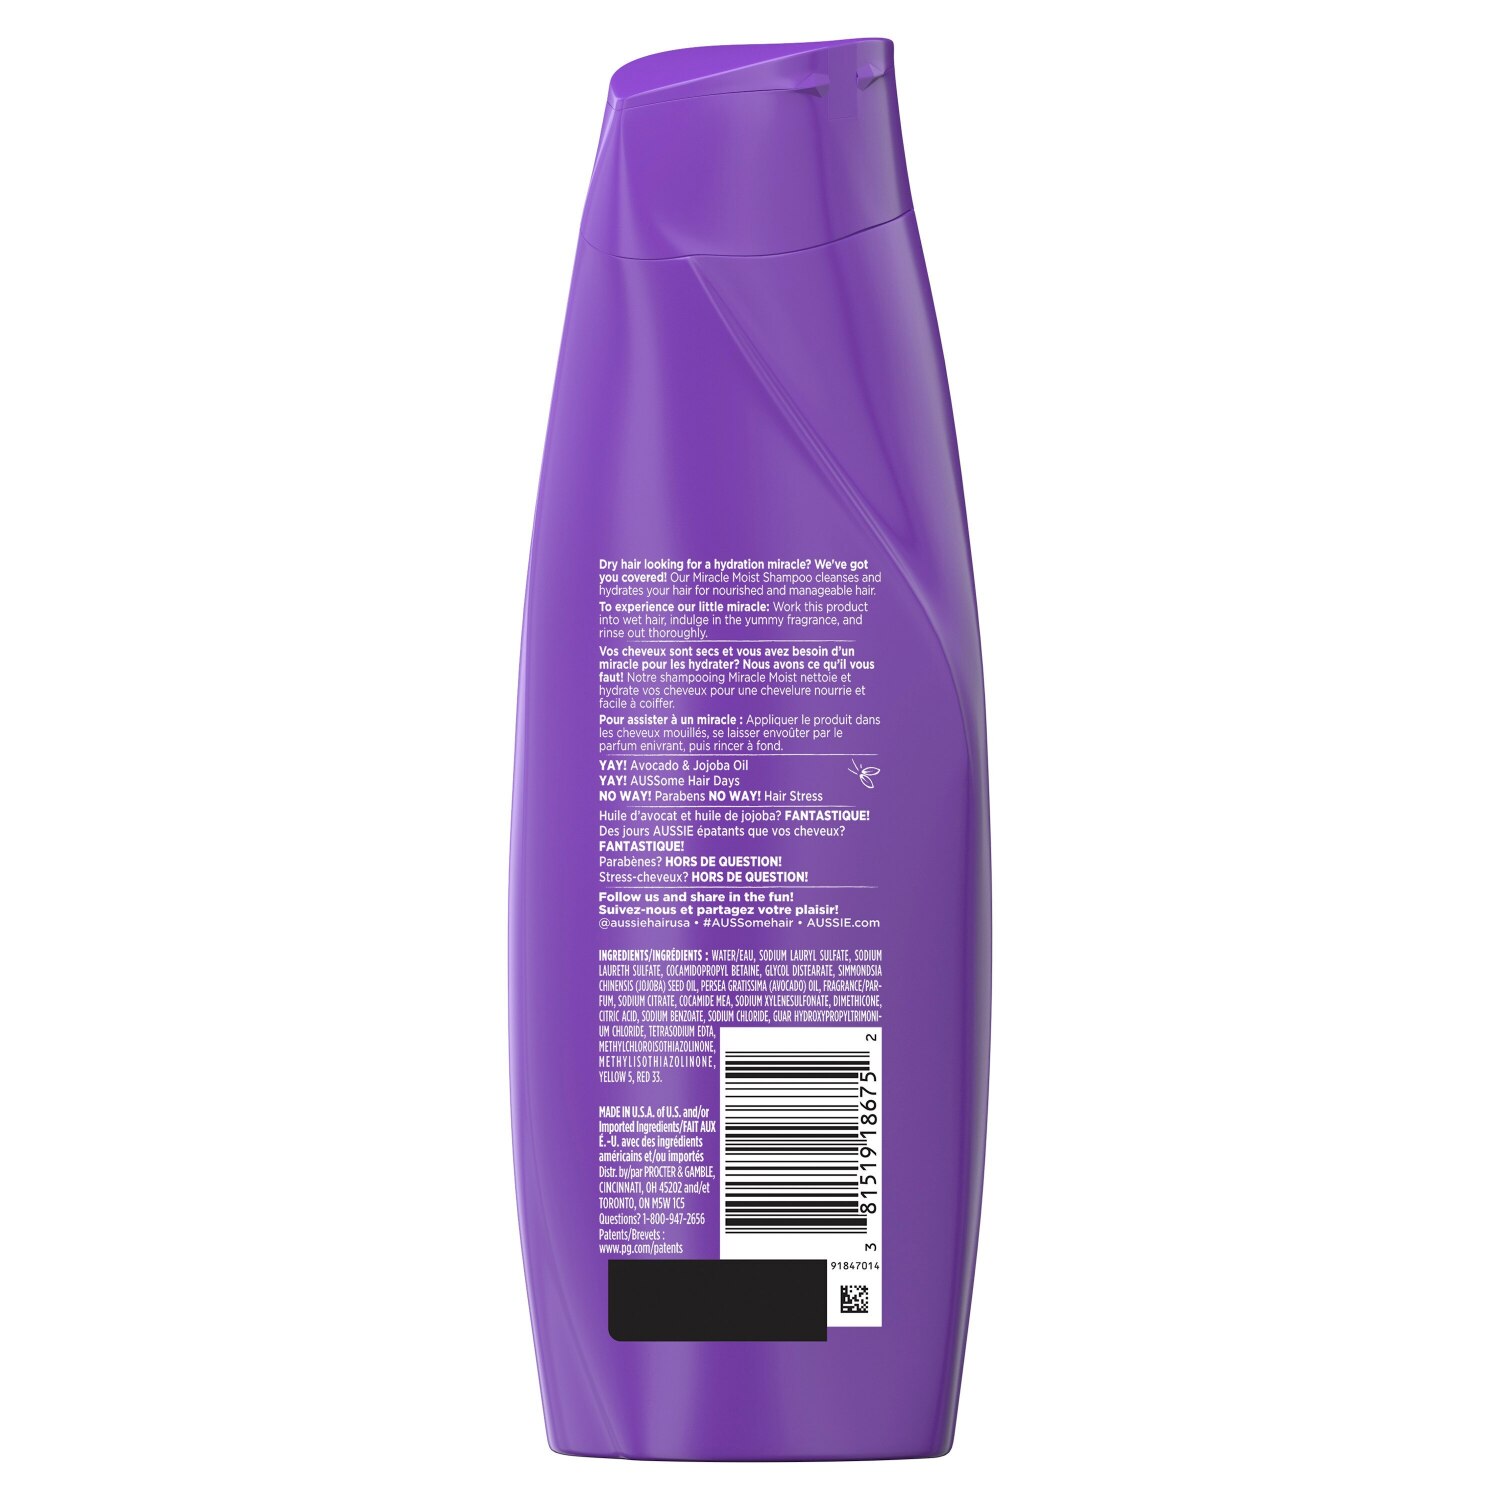 Aussie Paraben-Free Miracle Moist with Avocado Jojoba Oil For Hair | Pick Up Store TODAY at CVS